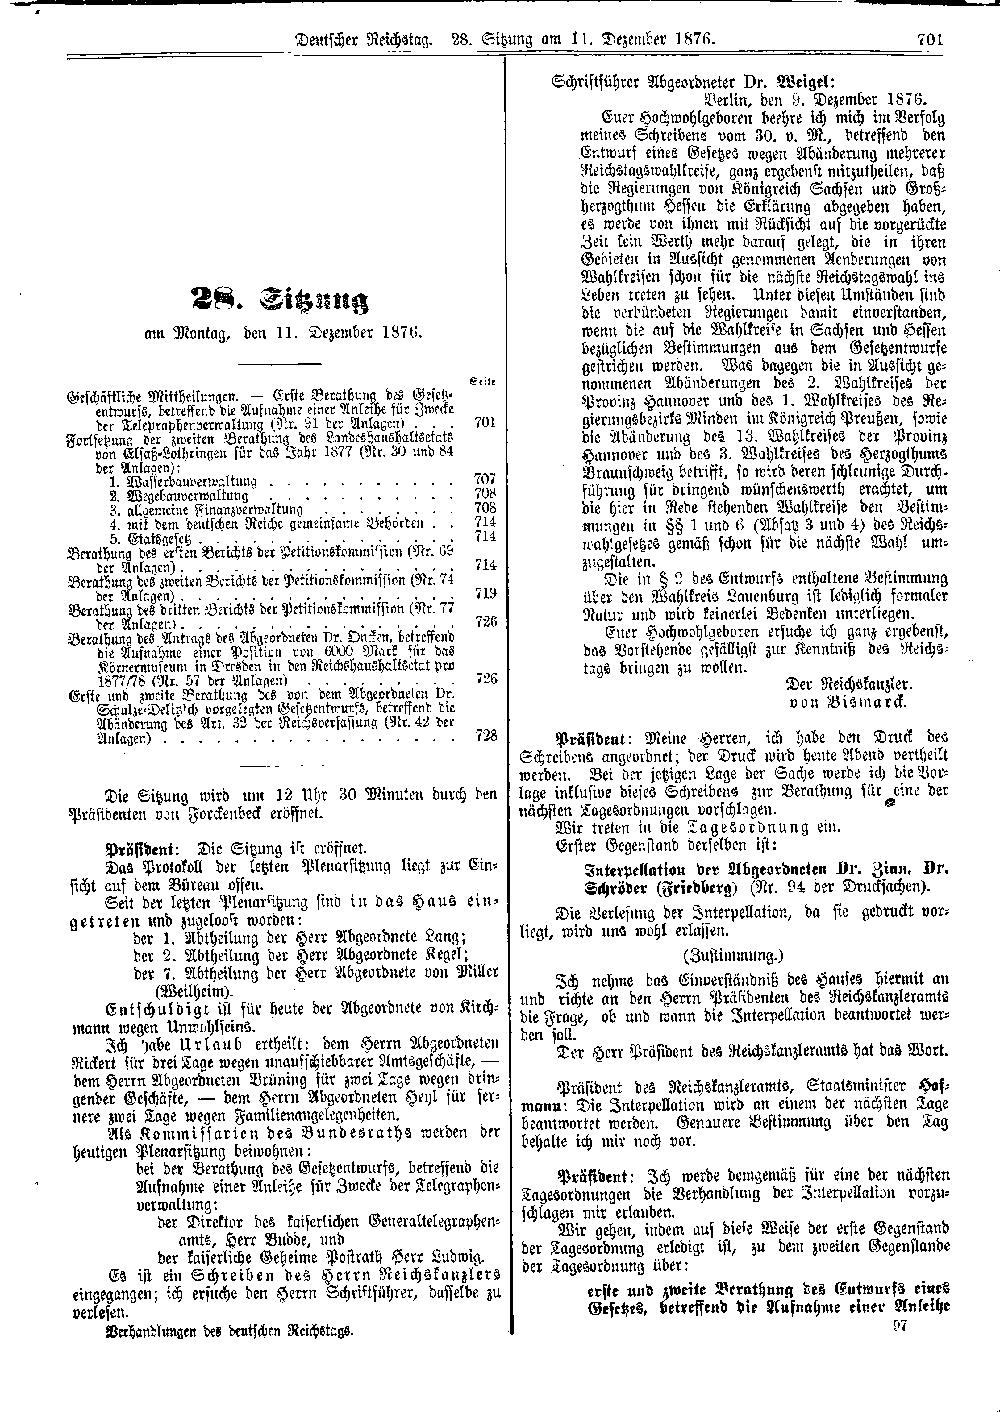 Scan of page 701